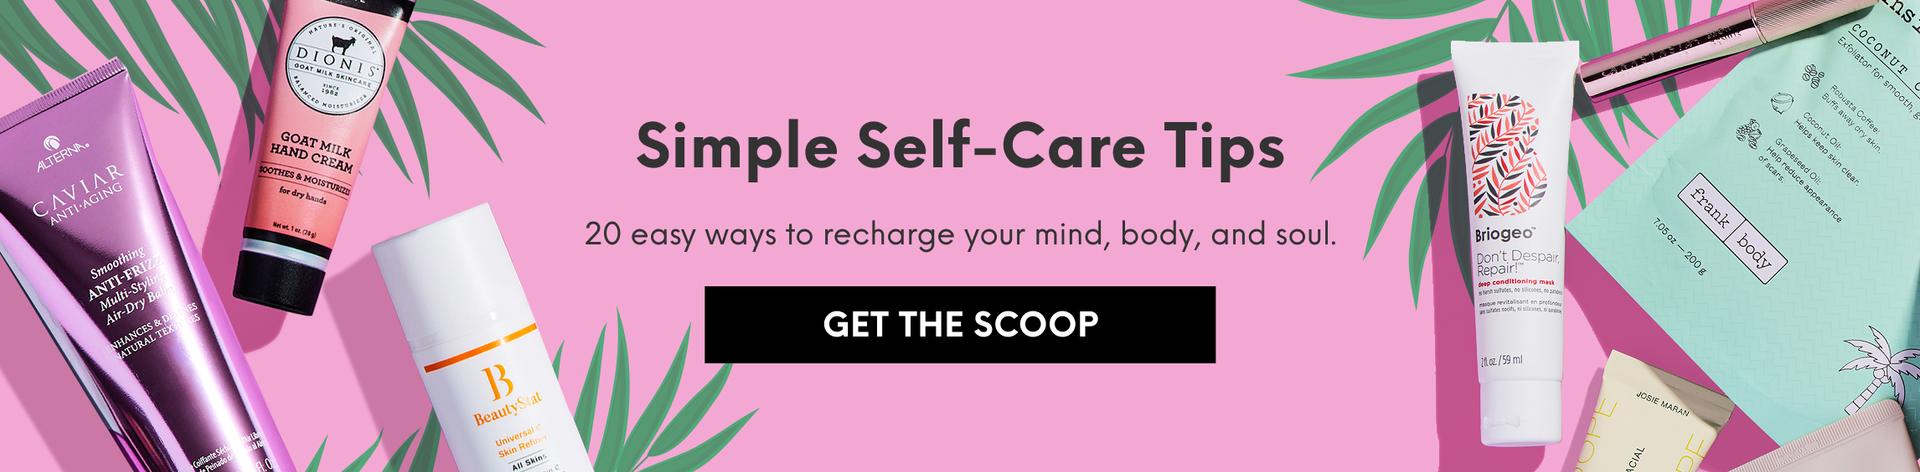 05_self_care_tips_sub_banner_D